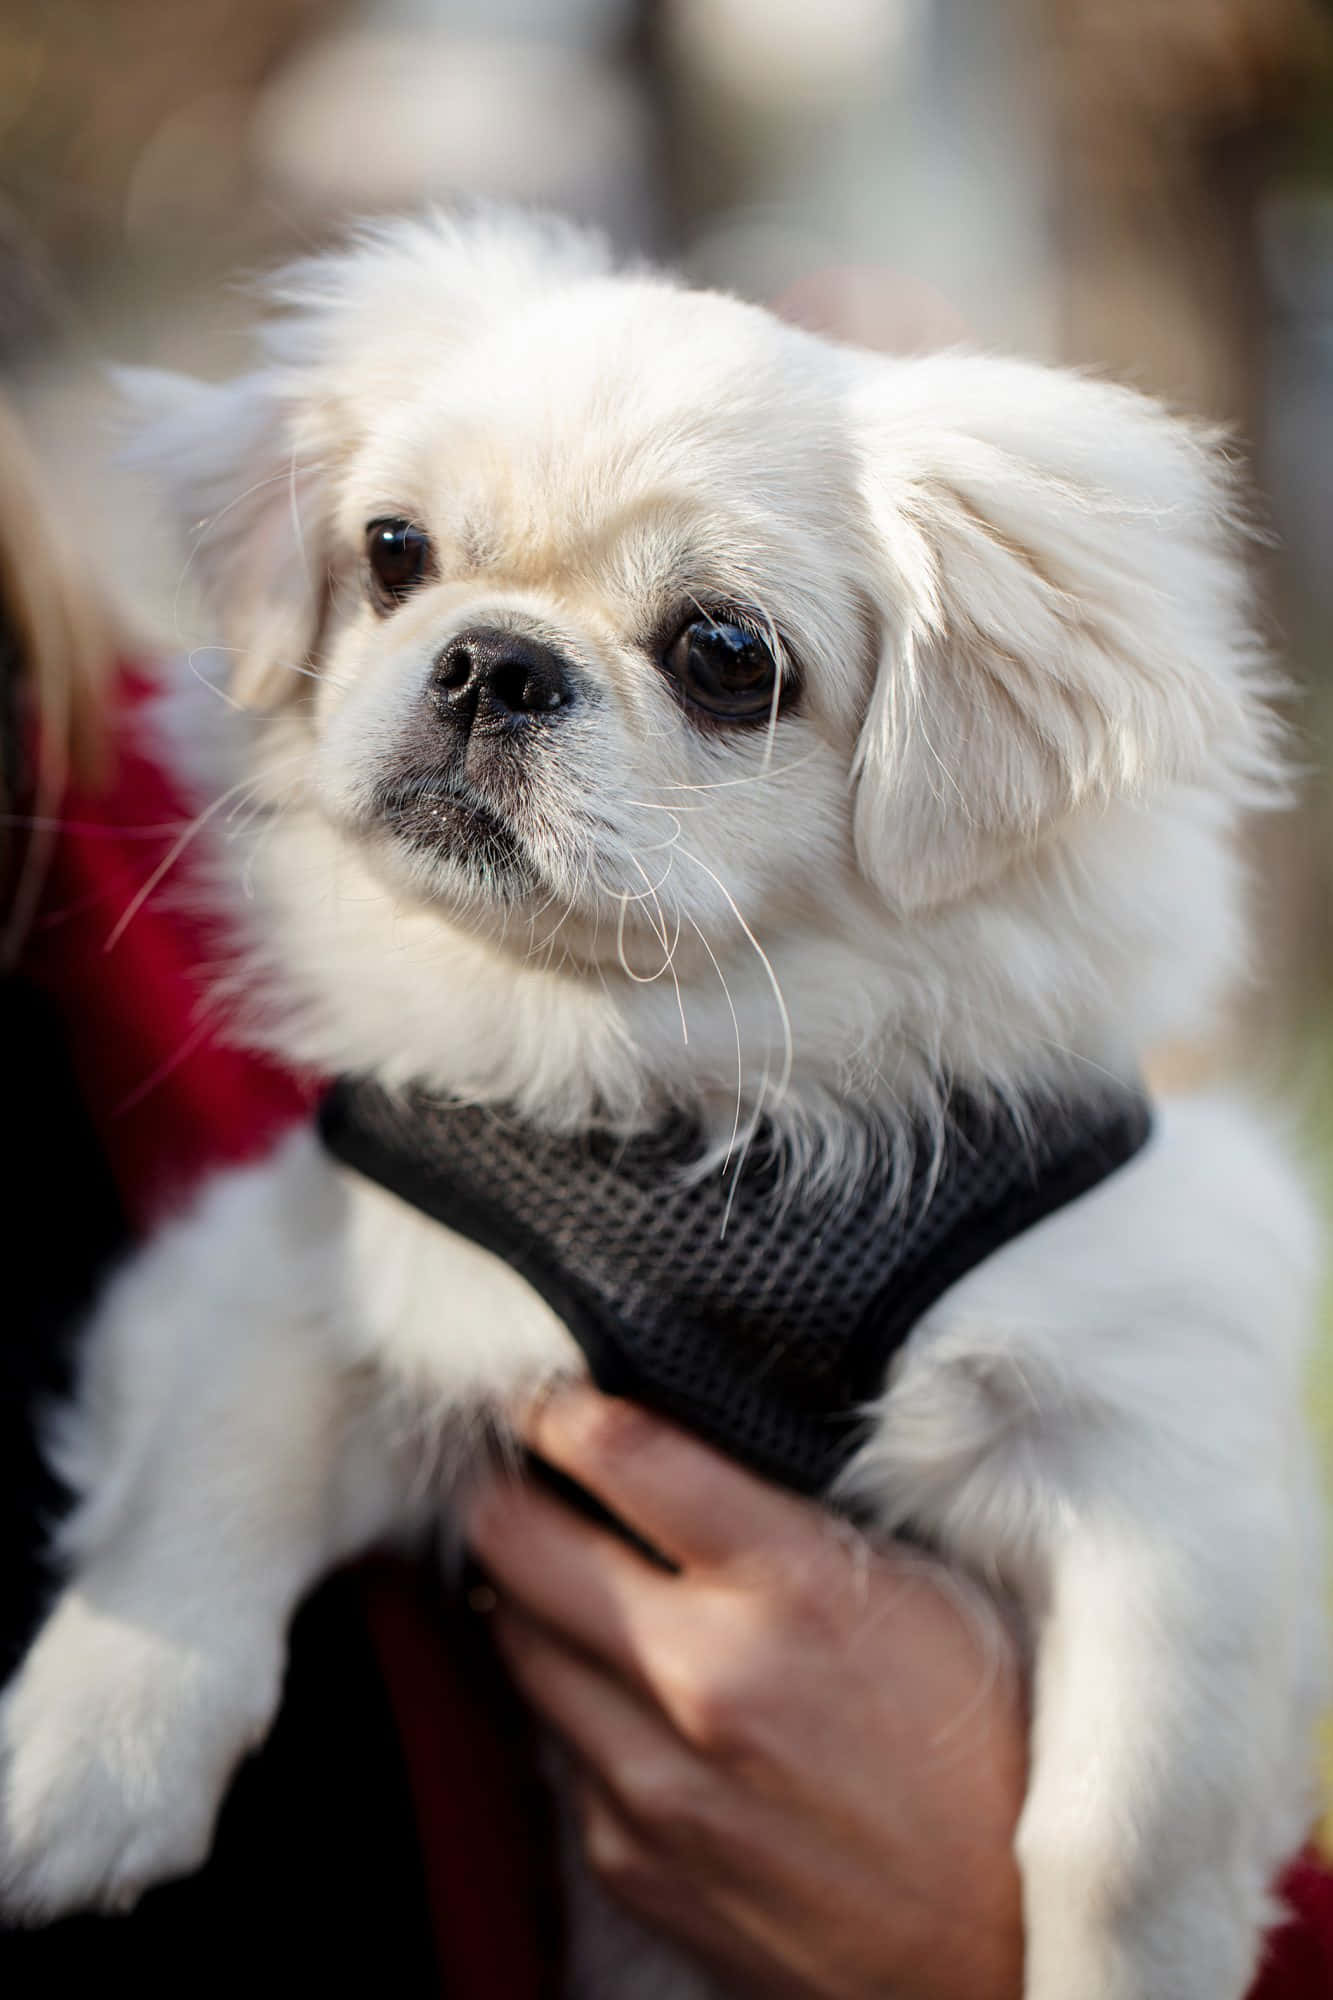 A content and loyal Pekingese dog